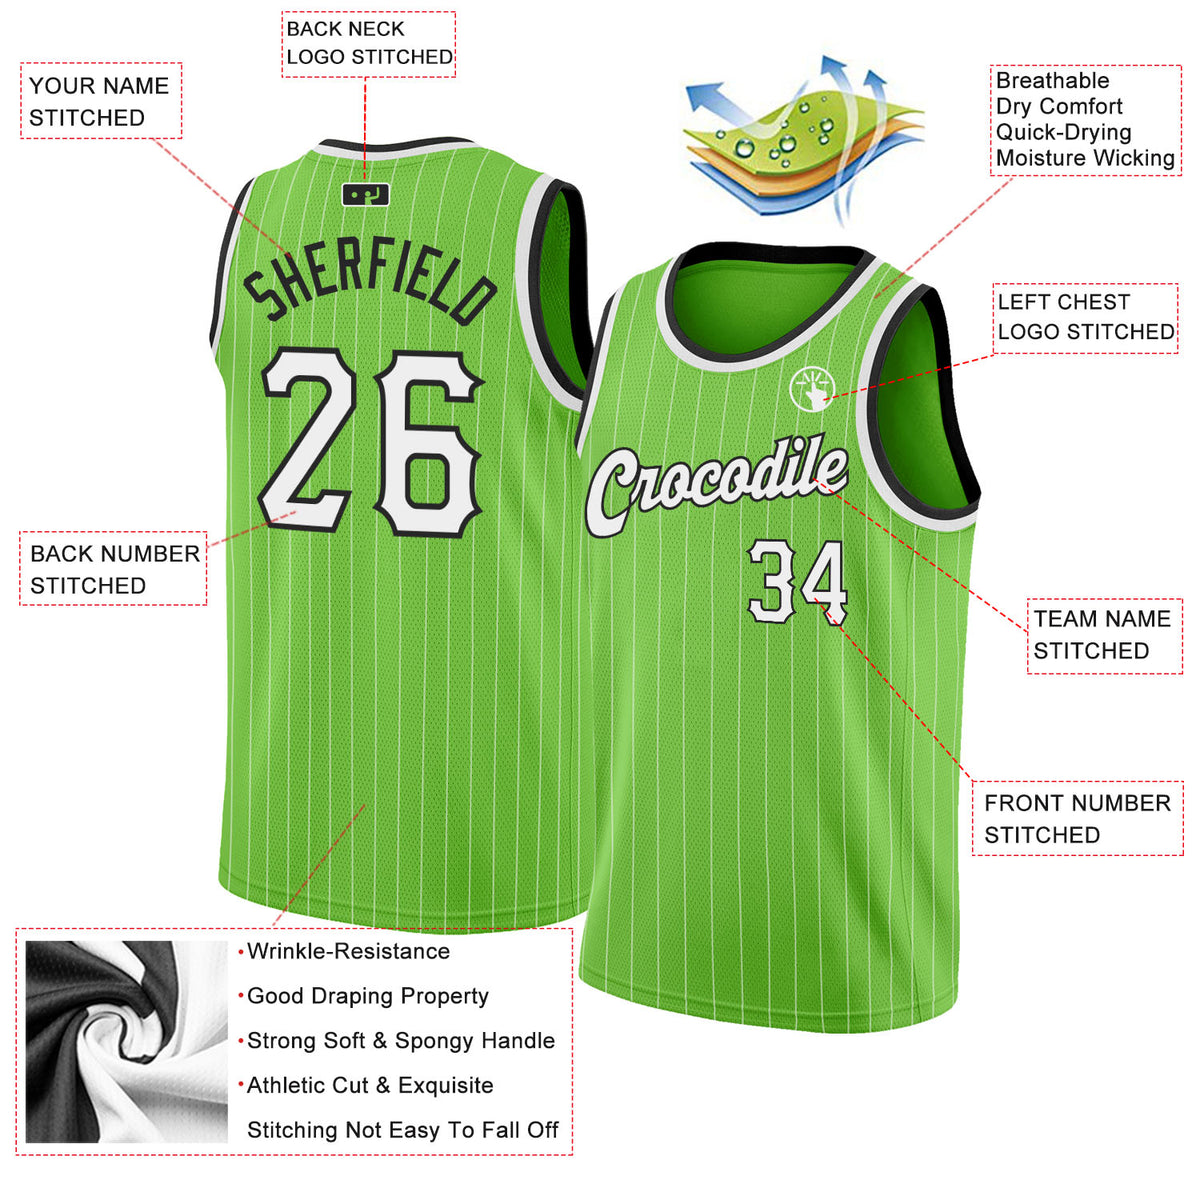 free customize of name and number only BASKETBALL MILWAUKEE 08 BUCKS JERSEY  full sublimation high quality fabrics jersey/ trending jersey